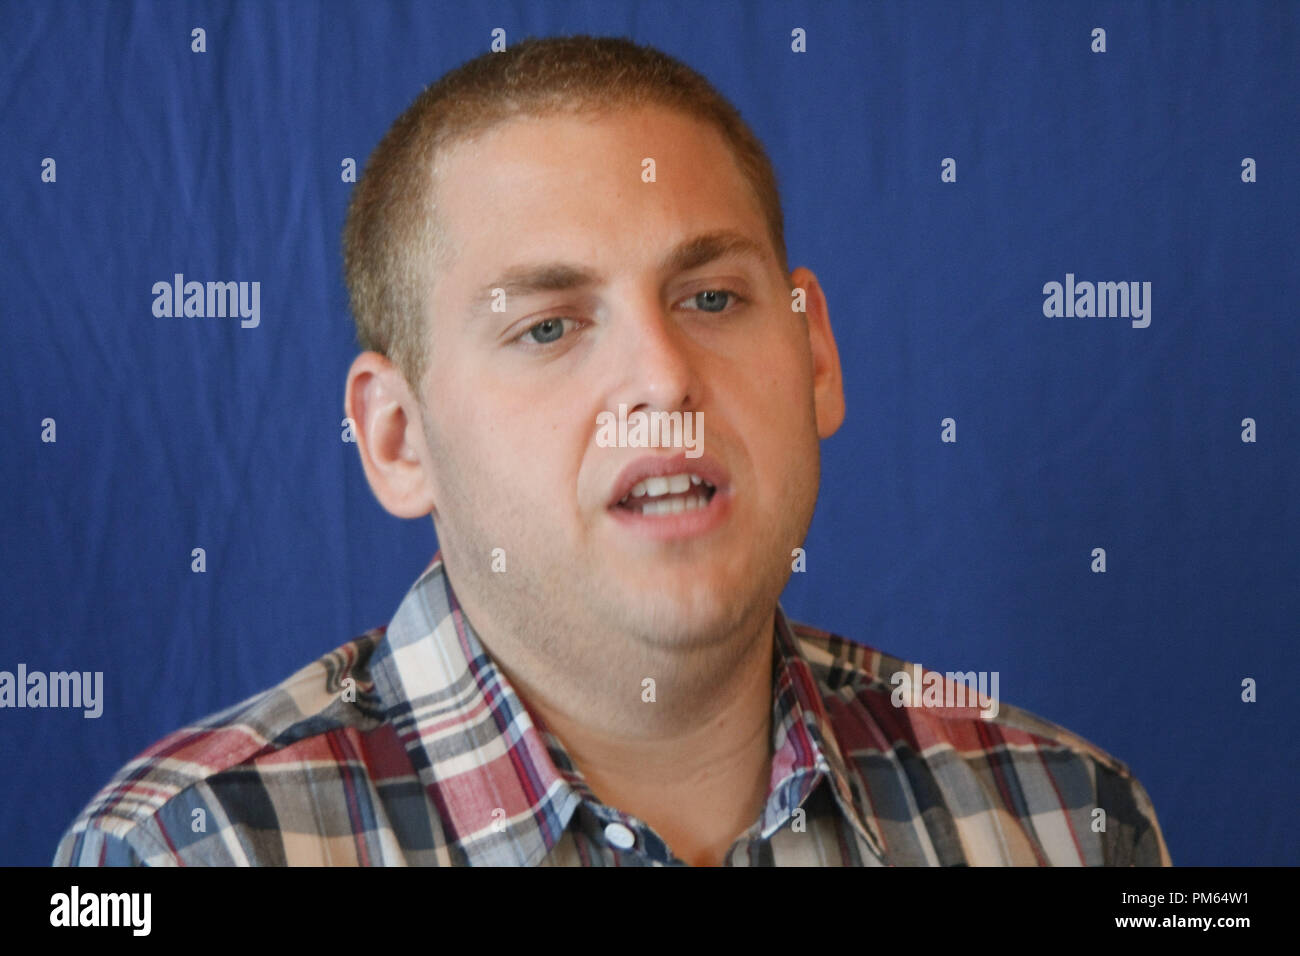 Jonah Hill 'Moneyball'  Portrait Session, July 10, 2011.  Reproduction by American tabloids is absolutely forbidden. File Reference # 31020 006JRC  For Editorial Use Only -  All Rights Reserved Stock Photo